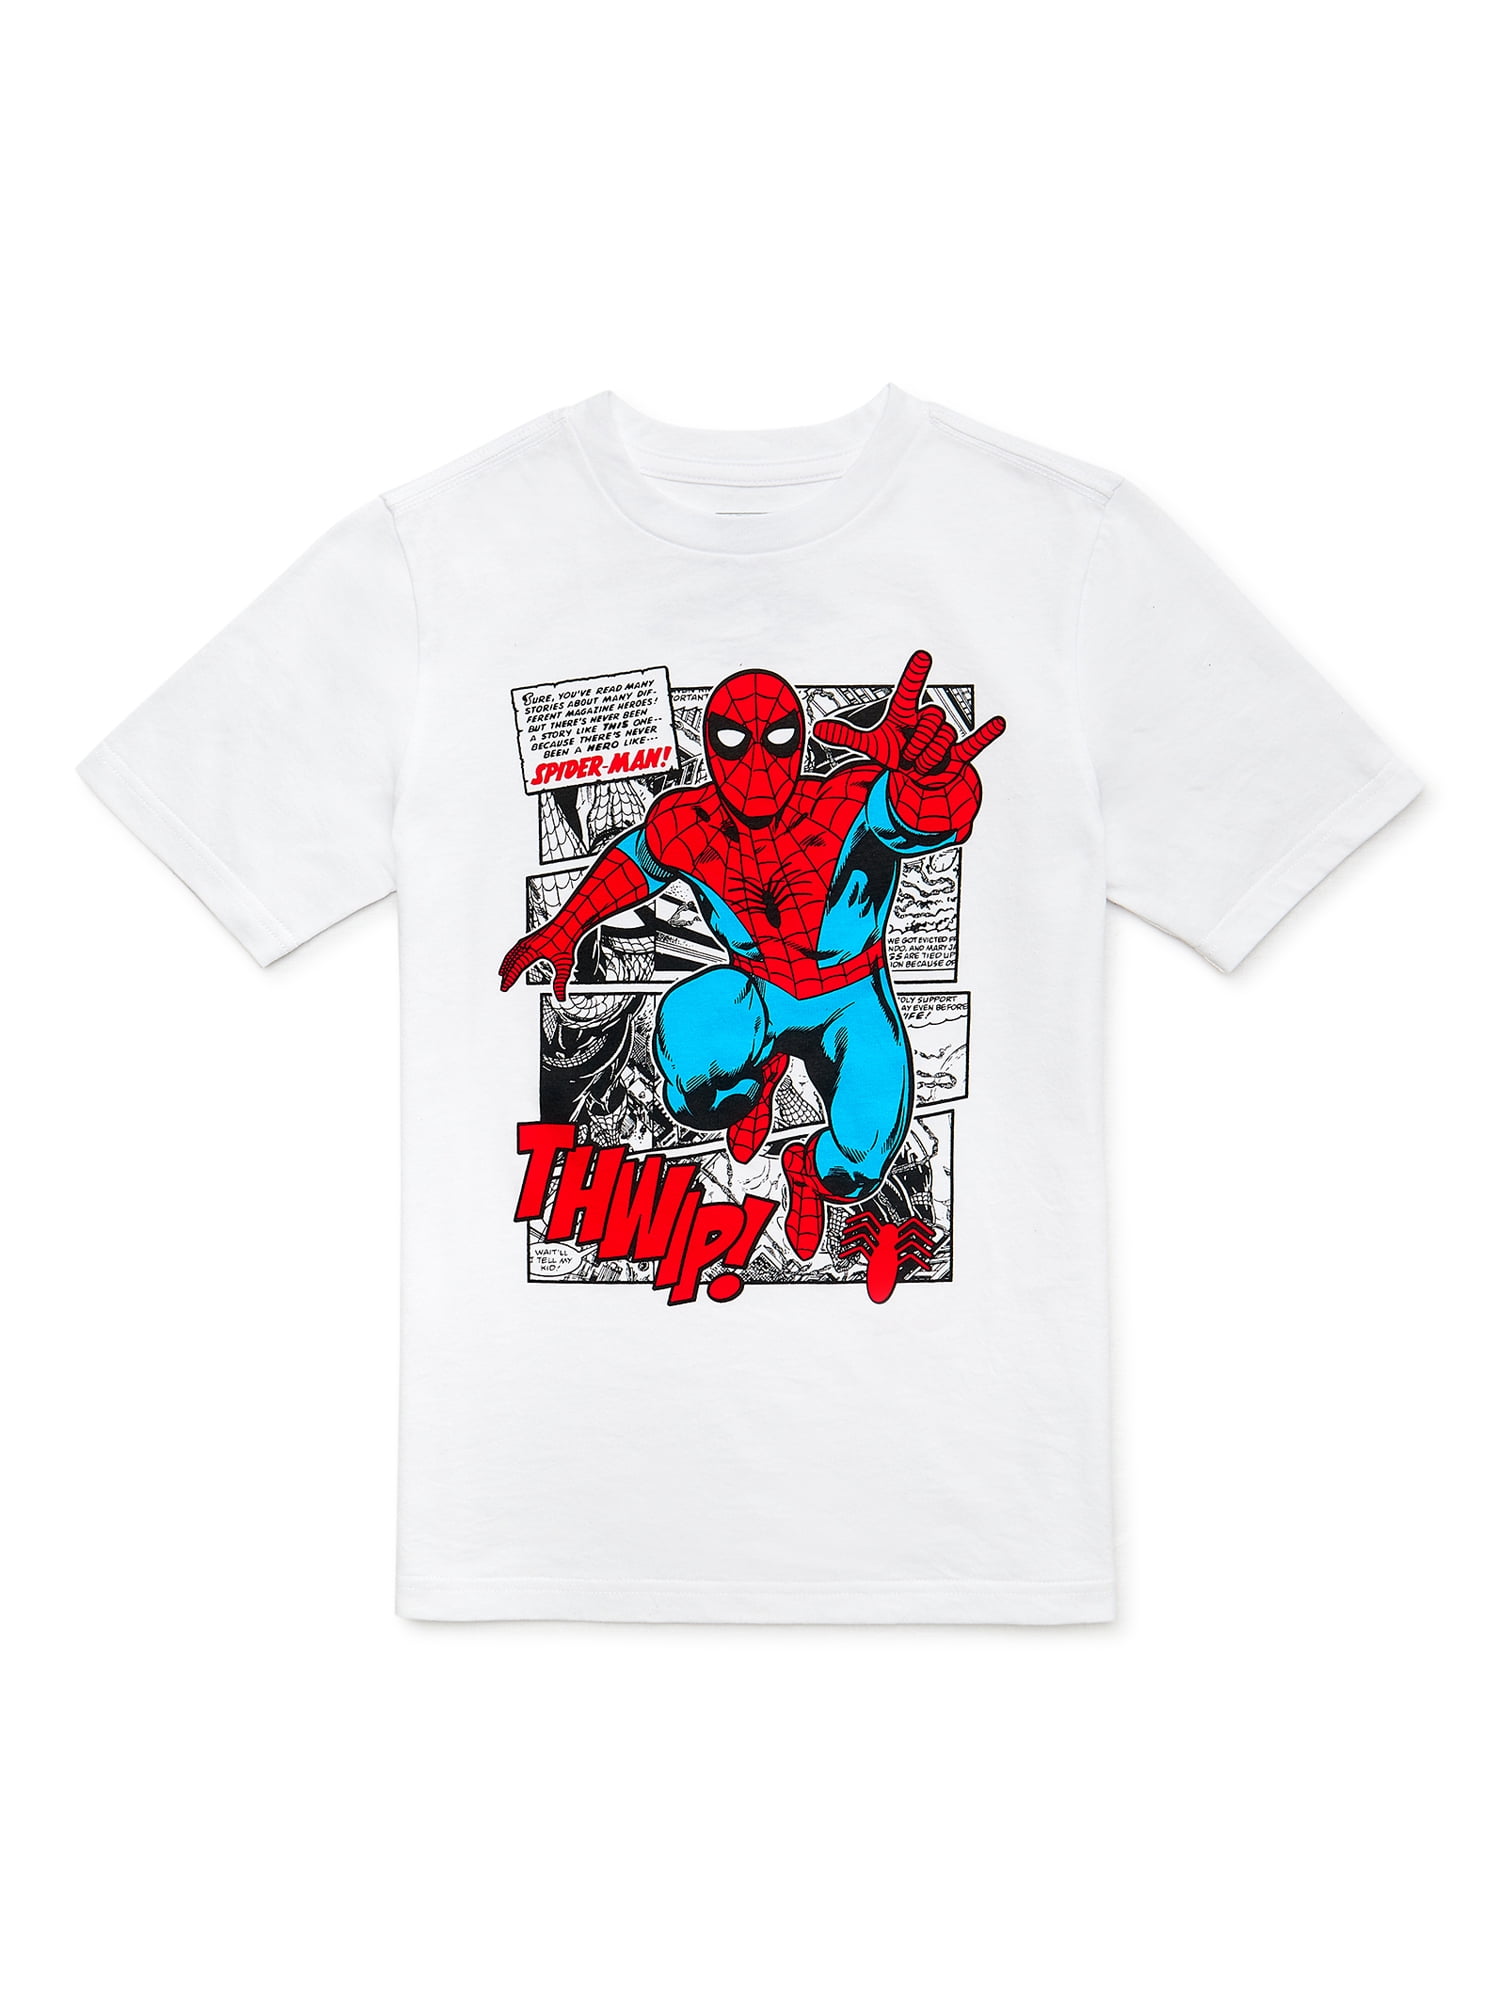 Spider-Man Boys Thwip T-Shirt with Short Sleeves, Sizes 4-18